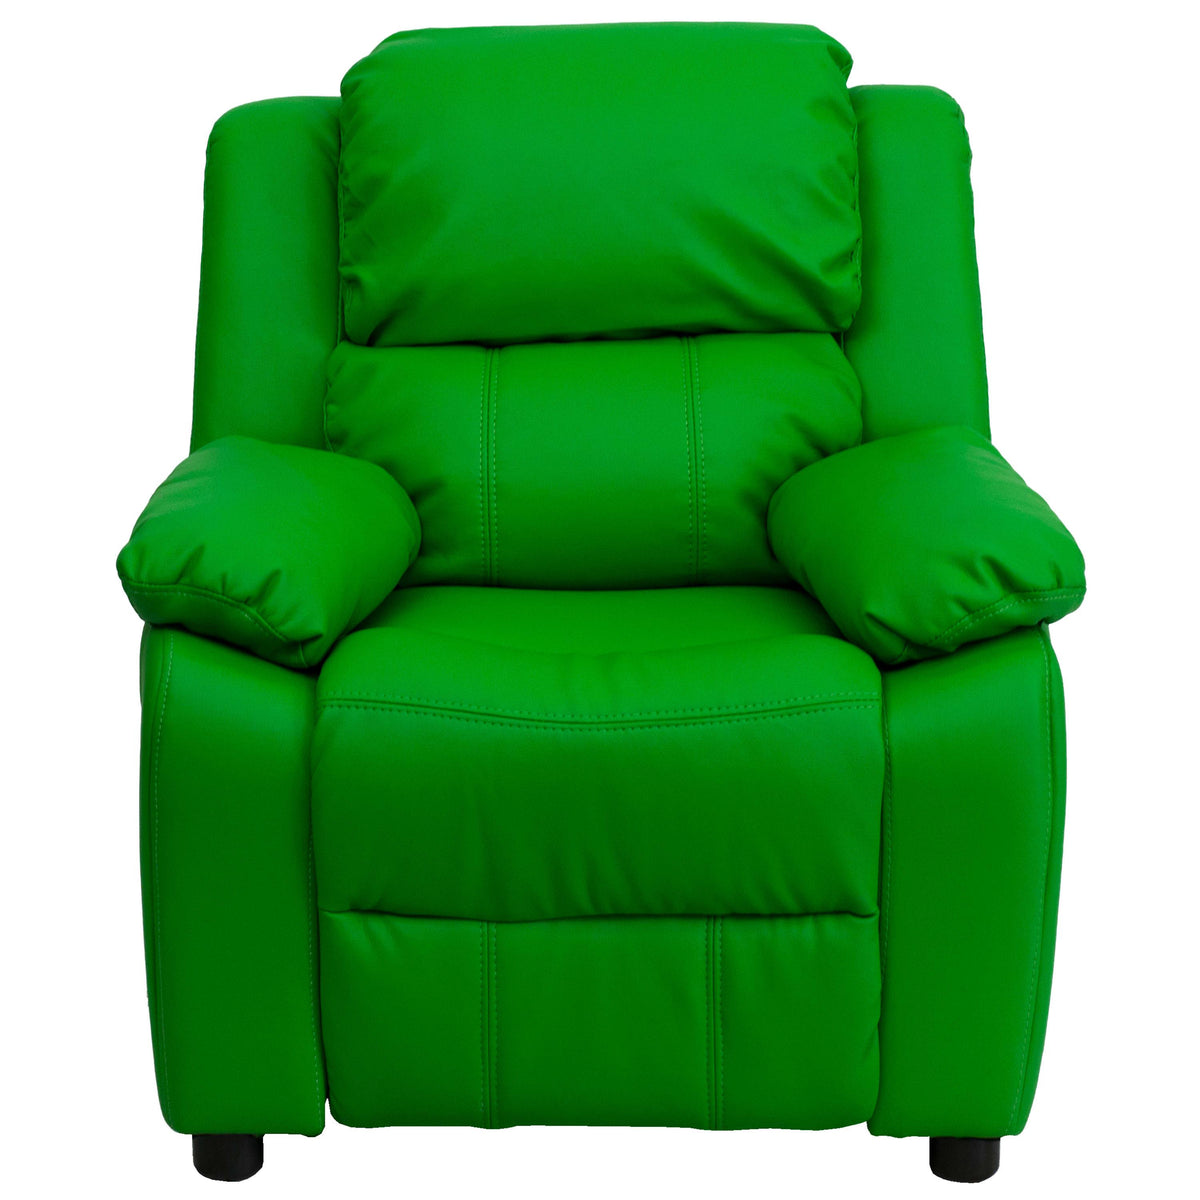 Green Vinyl |#| Deluxe Padded Contemporary Green Vinyl Kids Recliner with Storage Arms